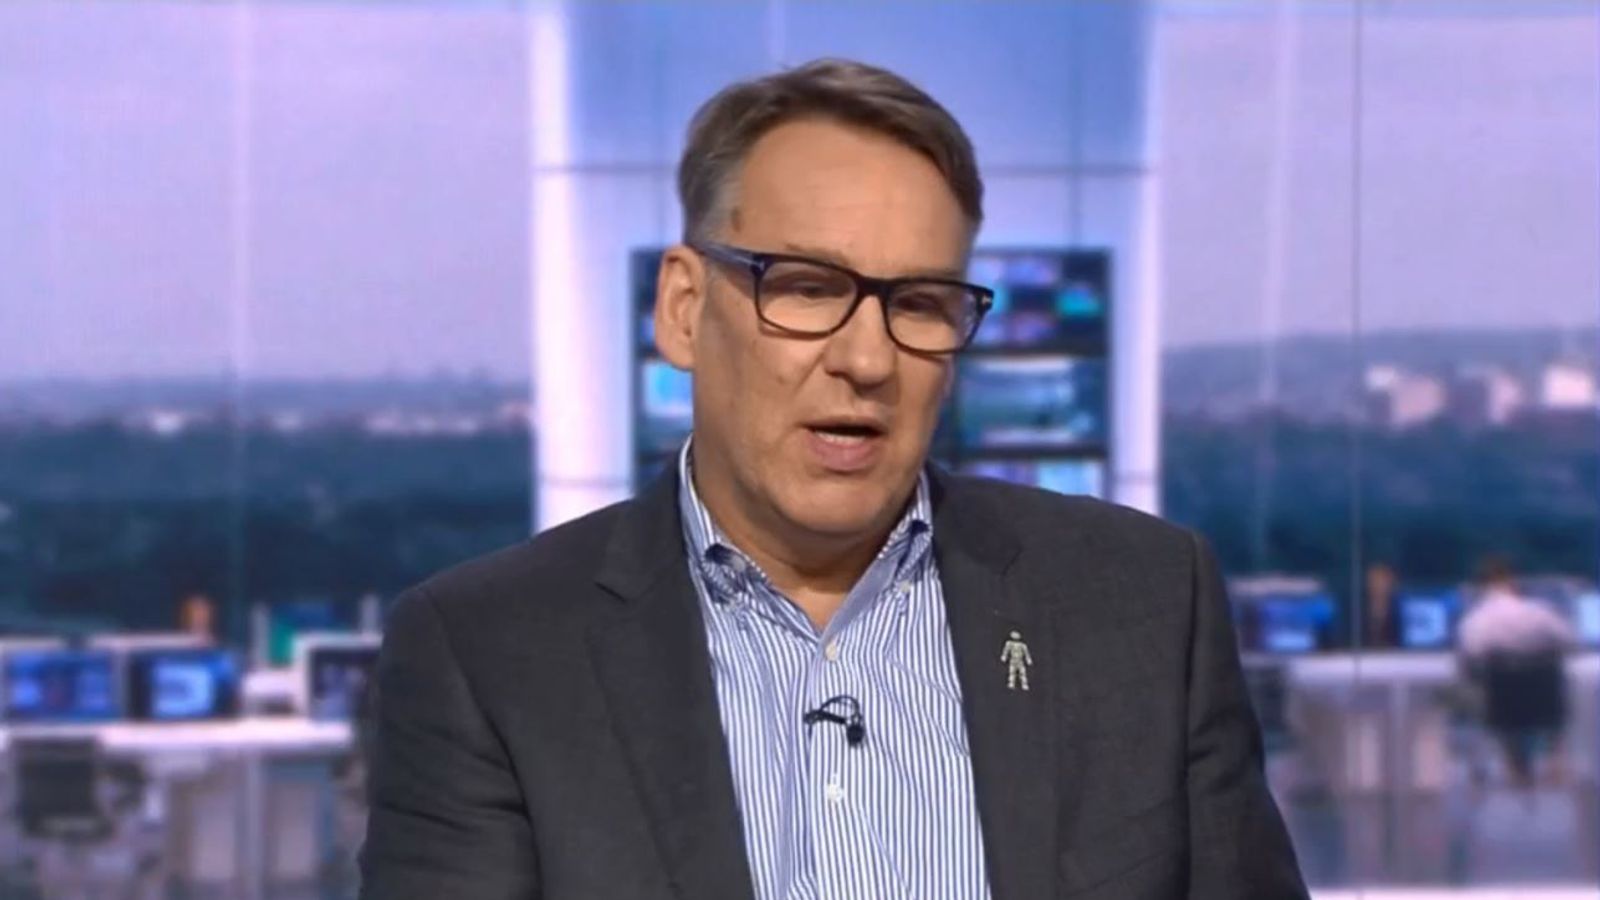 Paul Merson: Sky Sports pundit opens up on battle with depression |  Football News | Sky Sports